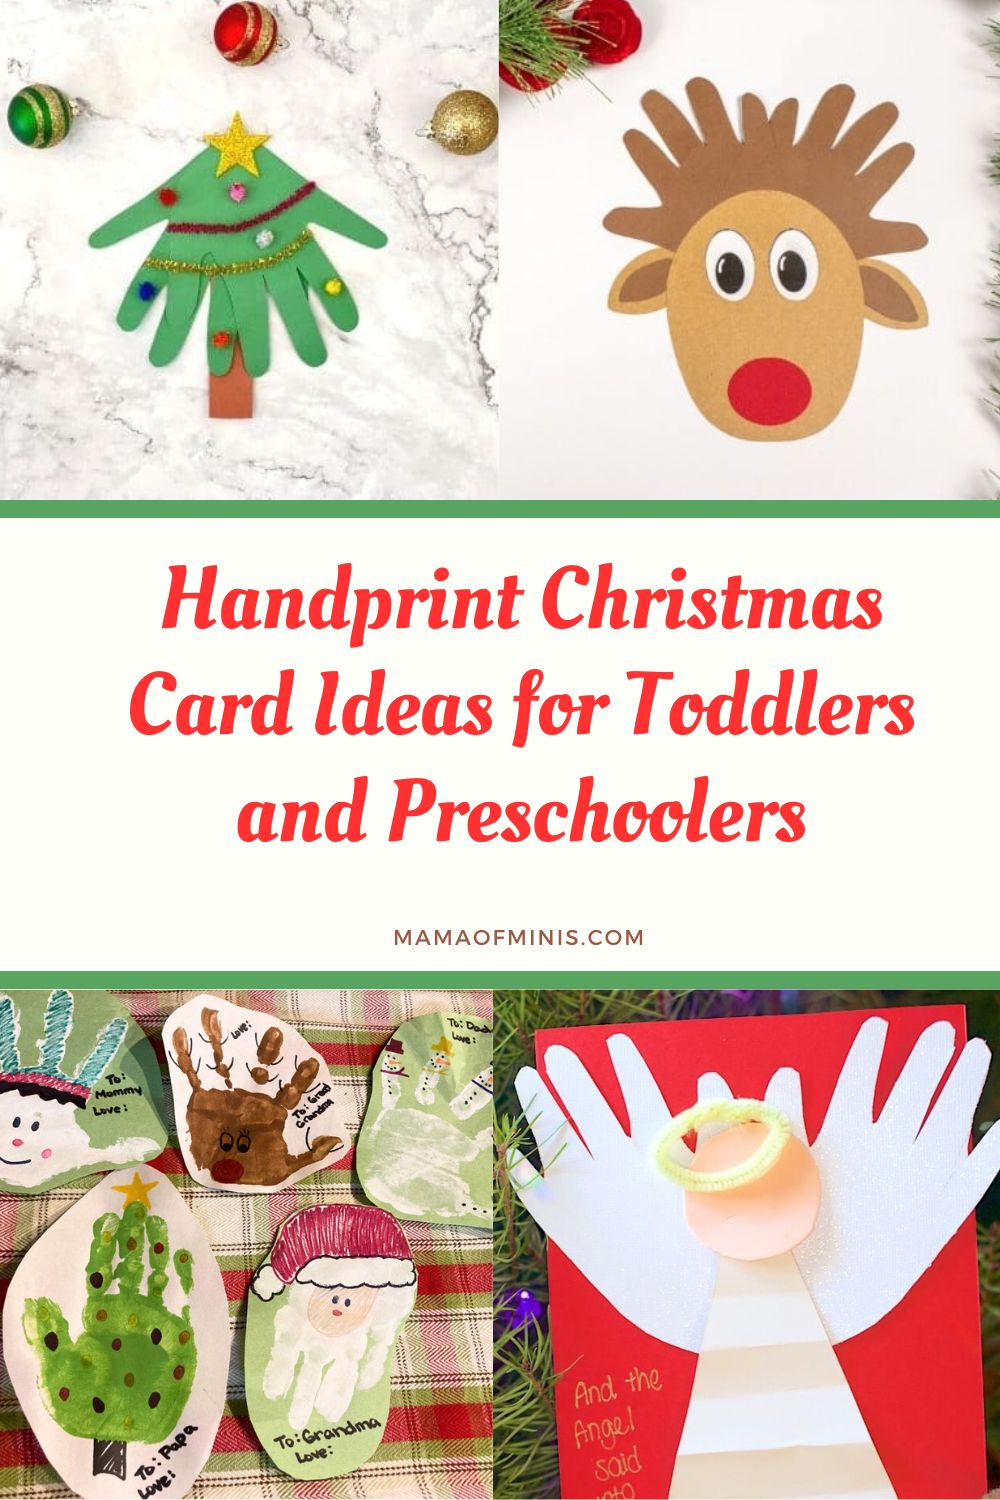 Handprint Christmas Card Ideas for Toddlers and Preschoolers